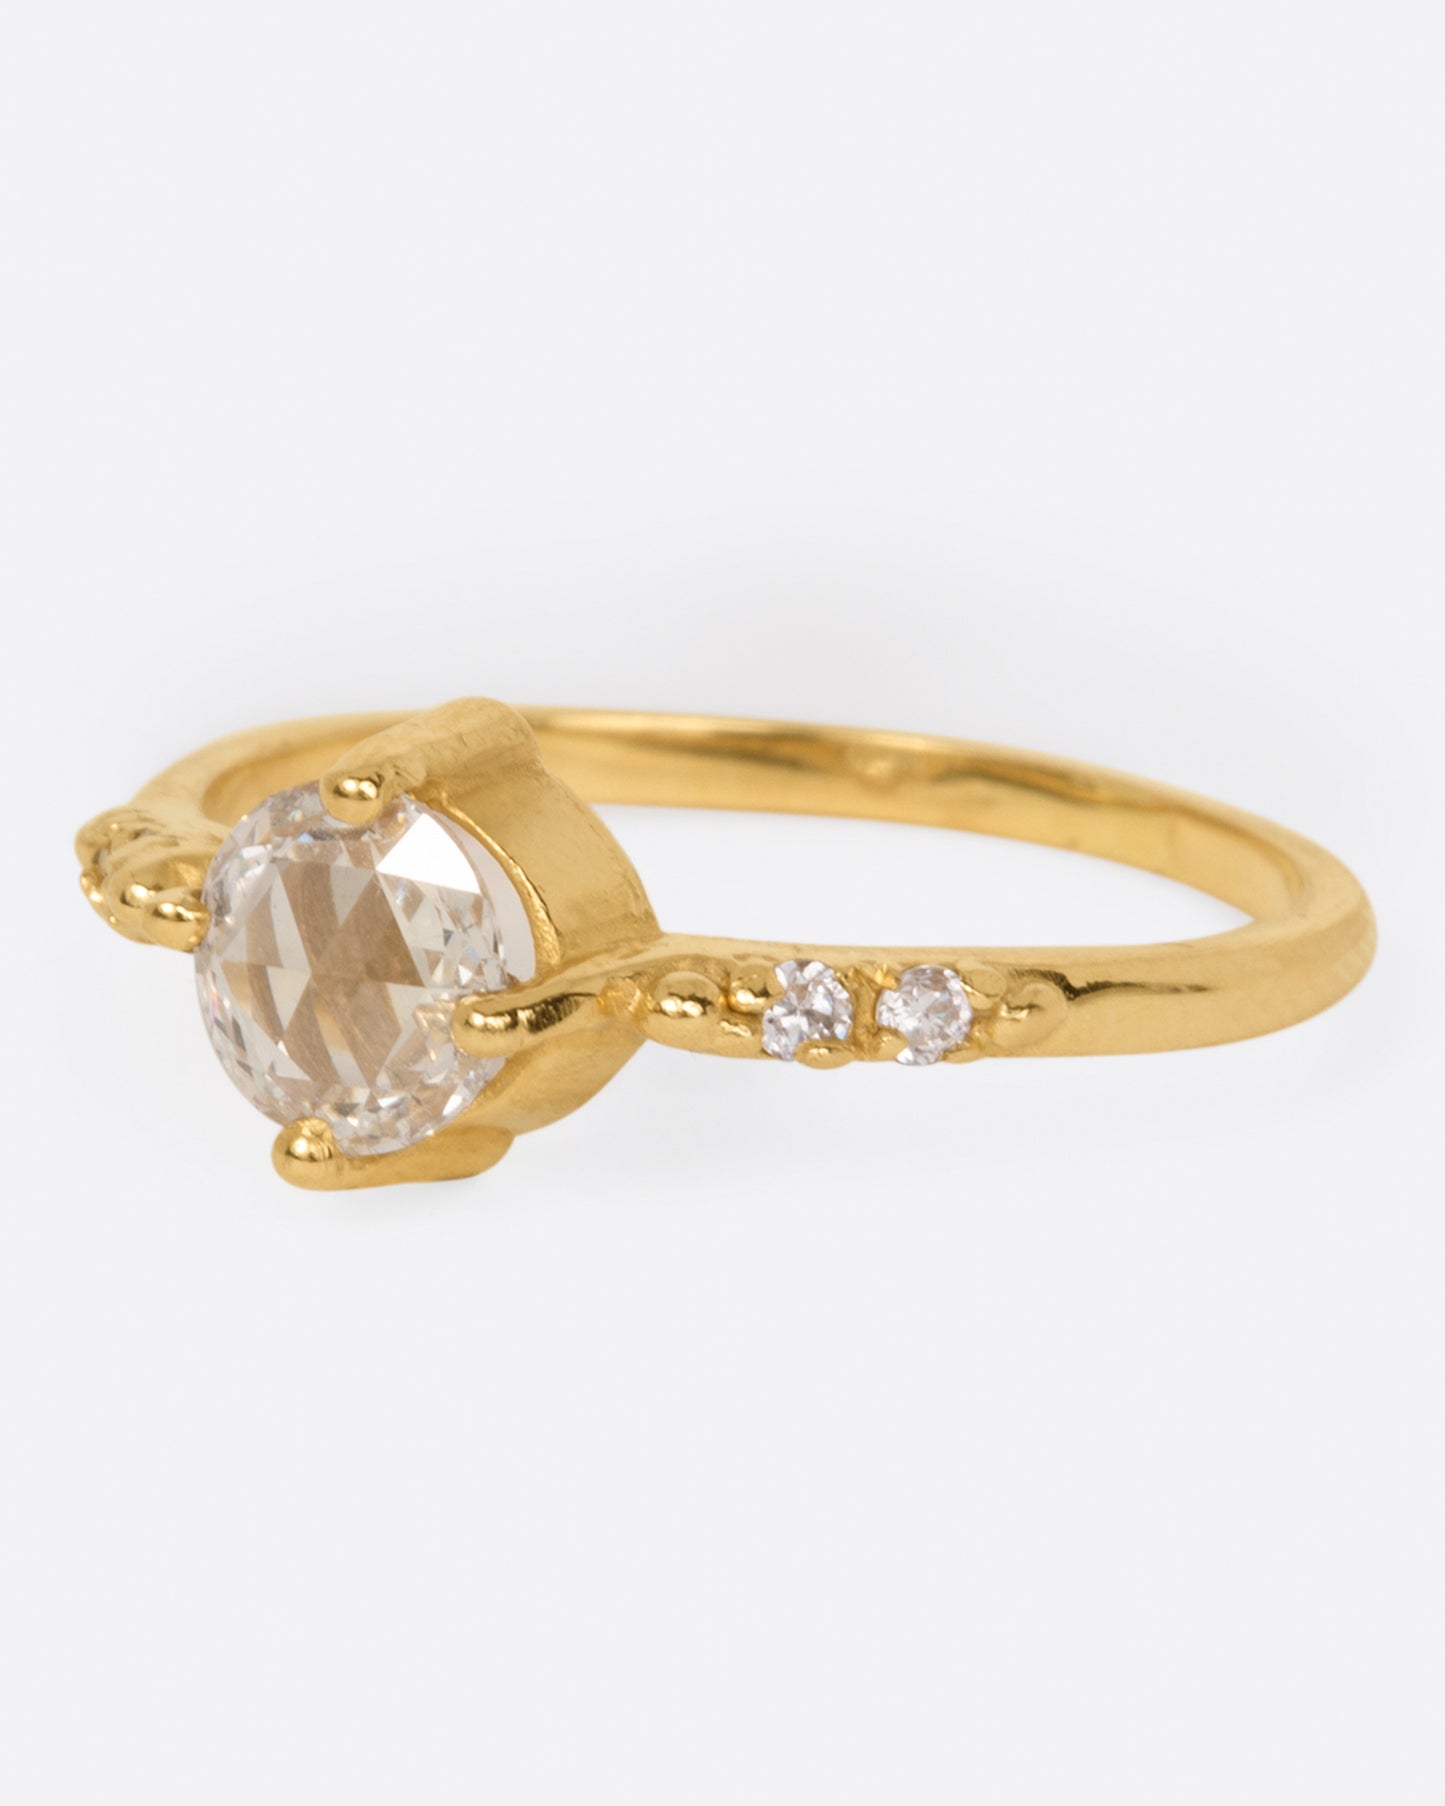 A yellow gold ring with a prong set rose cut diamond at the center and two diamonds on either side, shown from the side.